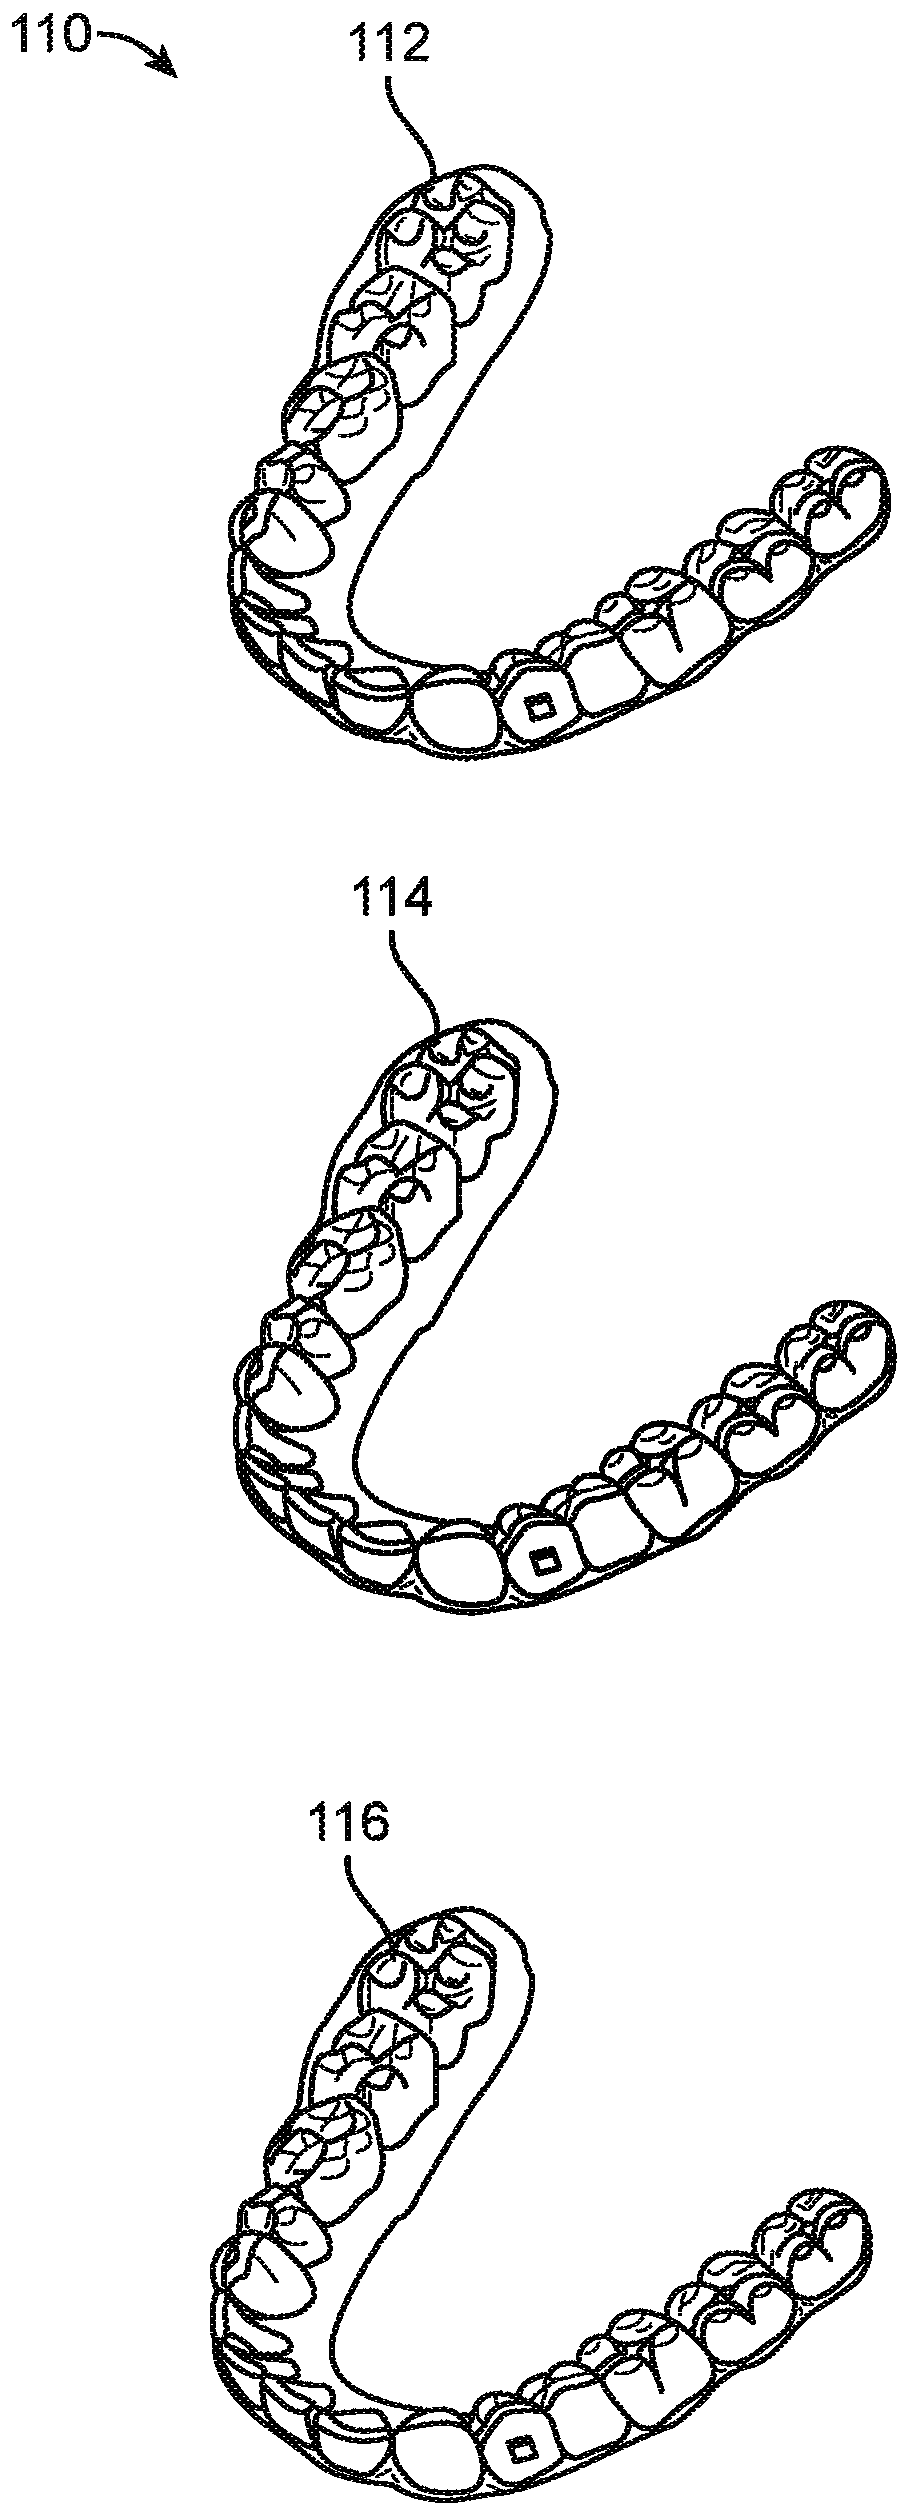 Systems, methods, and apparatus for correcting malocclusions of teeth